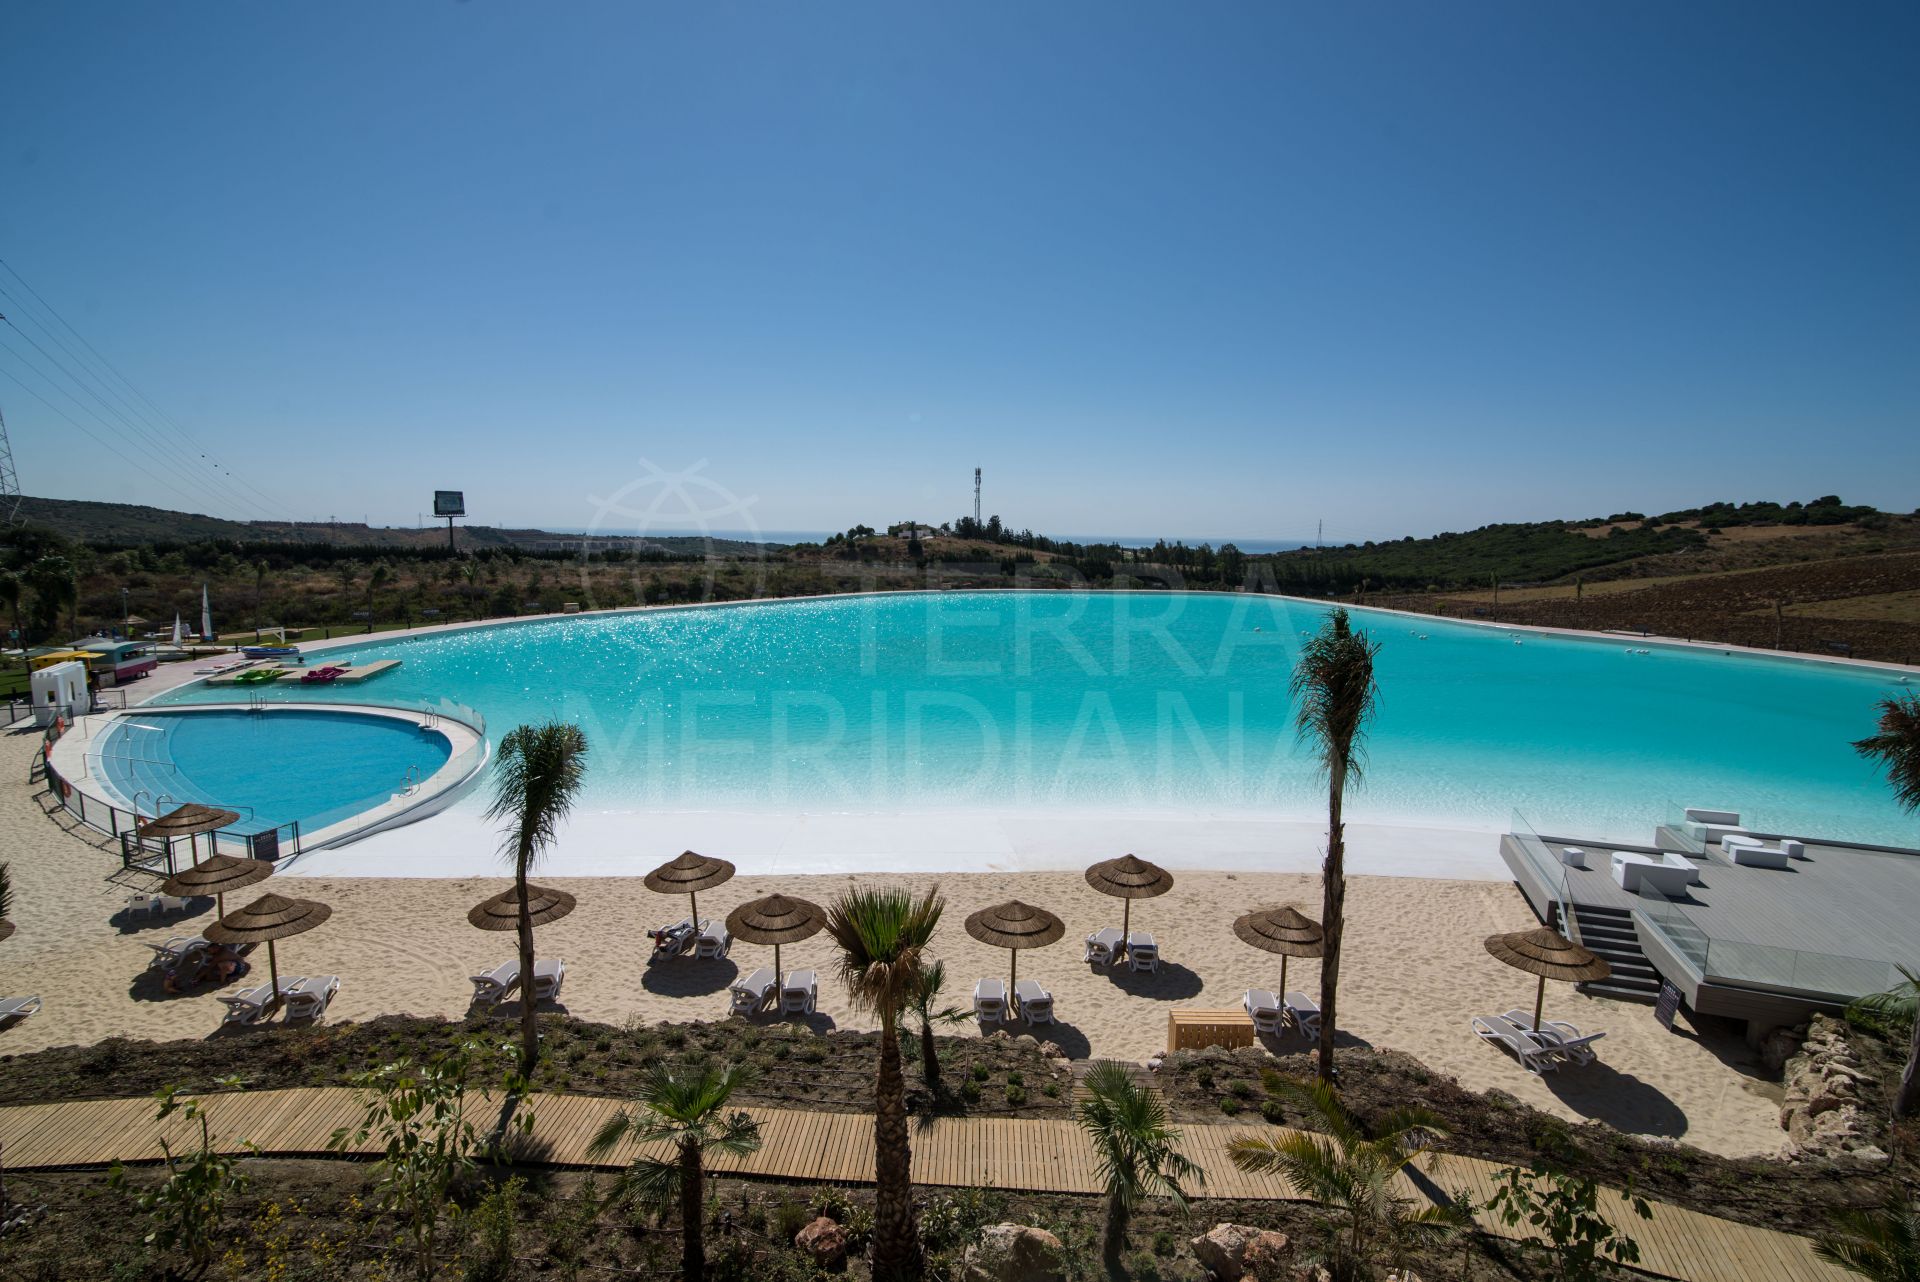 New penthouse apartment centred around a watersports lagoon for sale in Alcazaba Lagoon, Casares